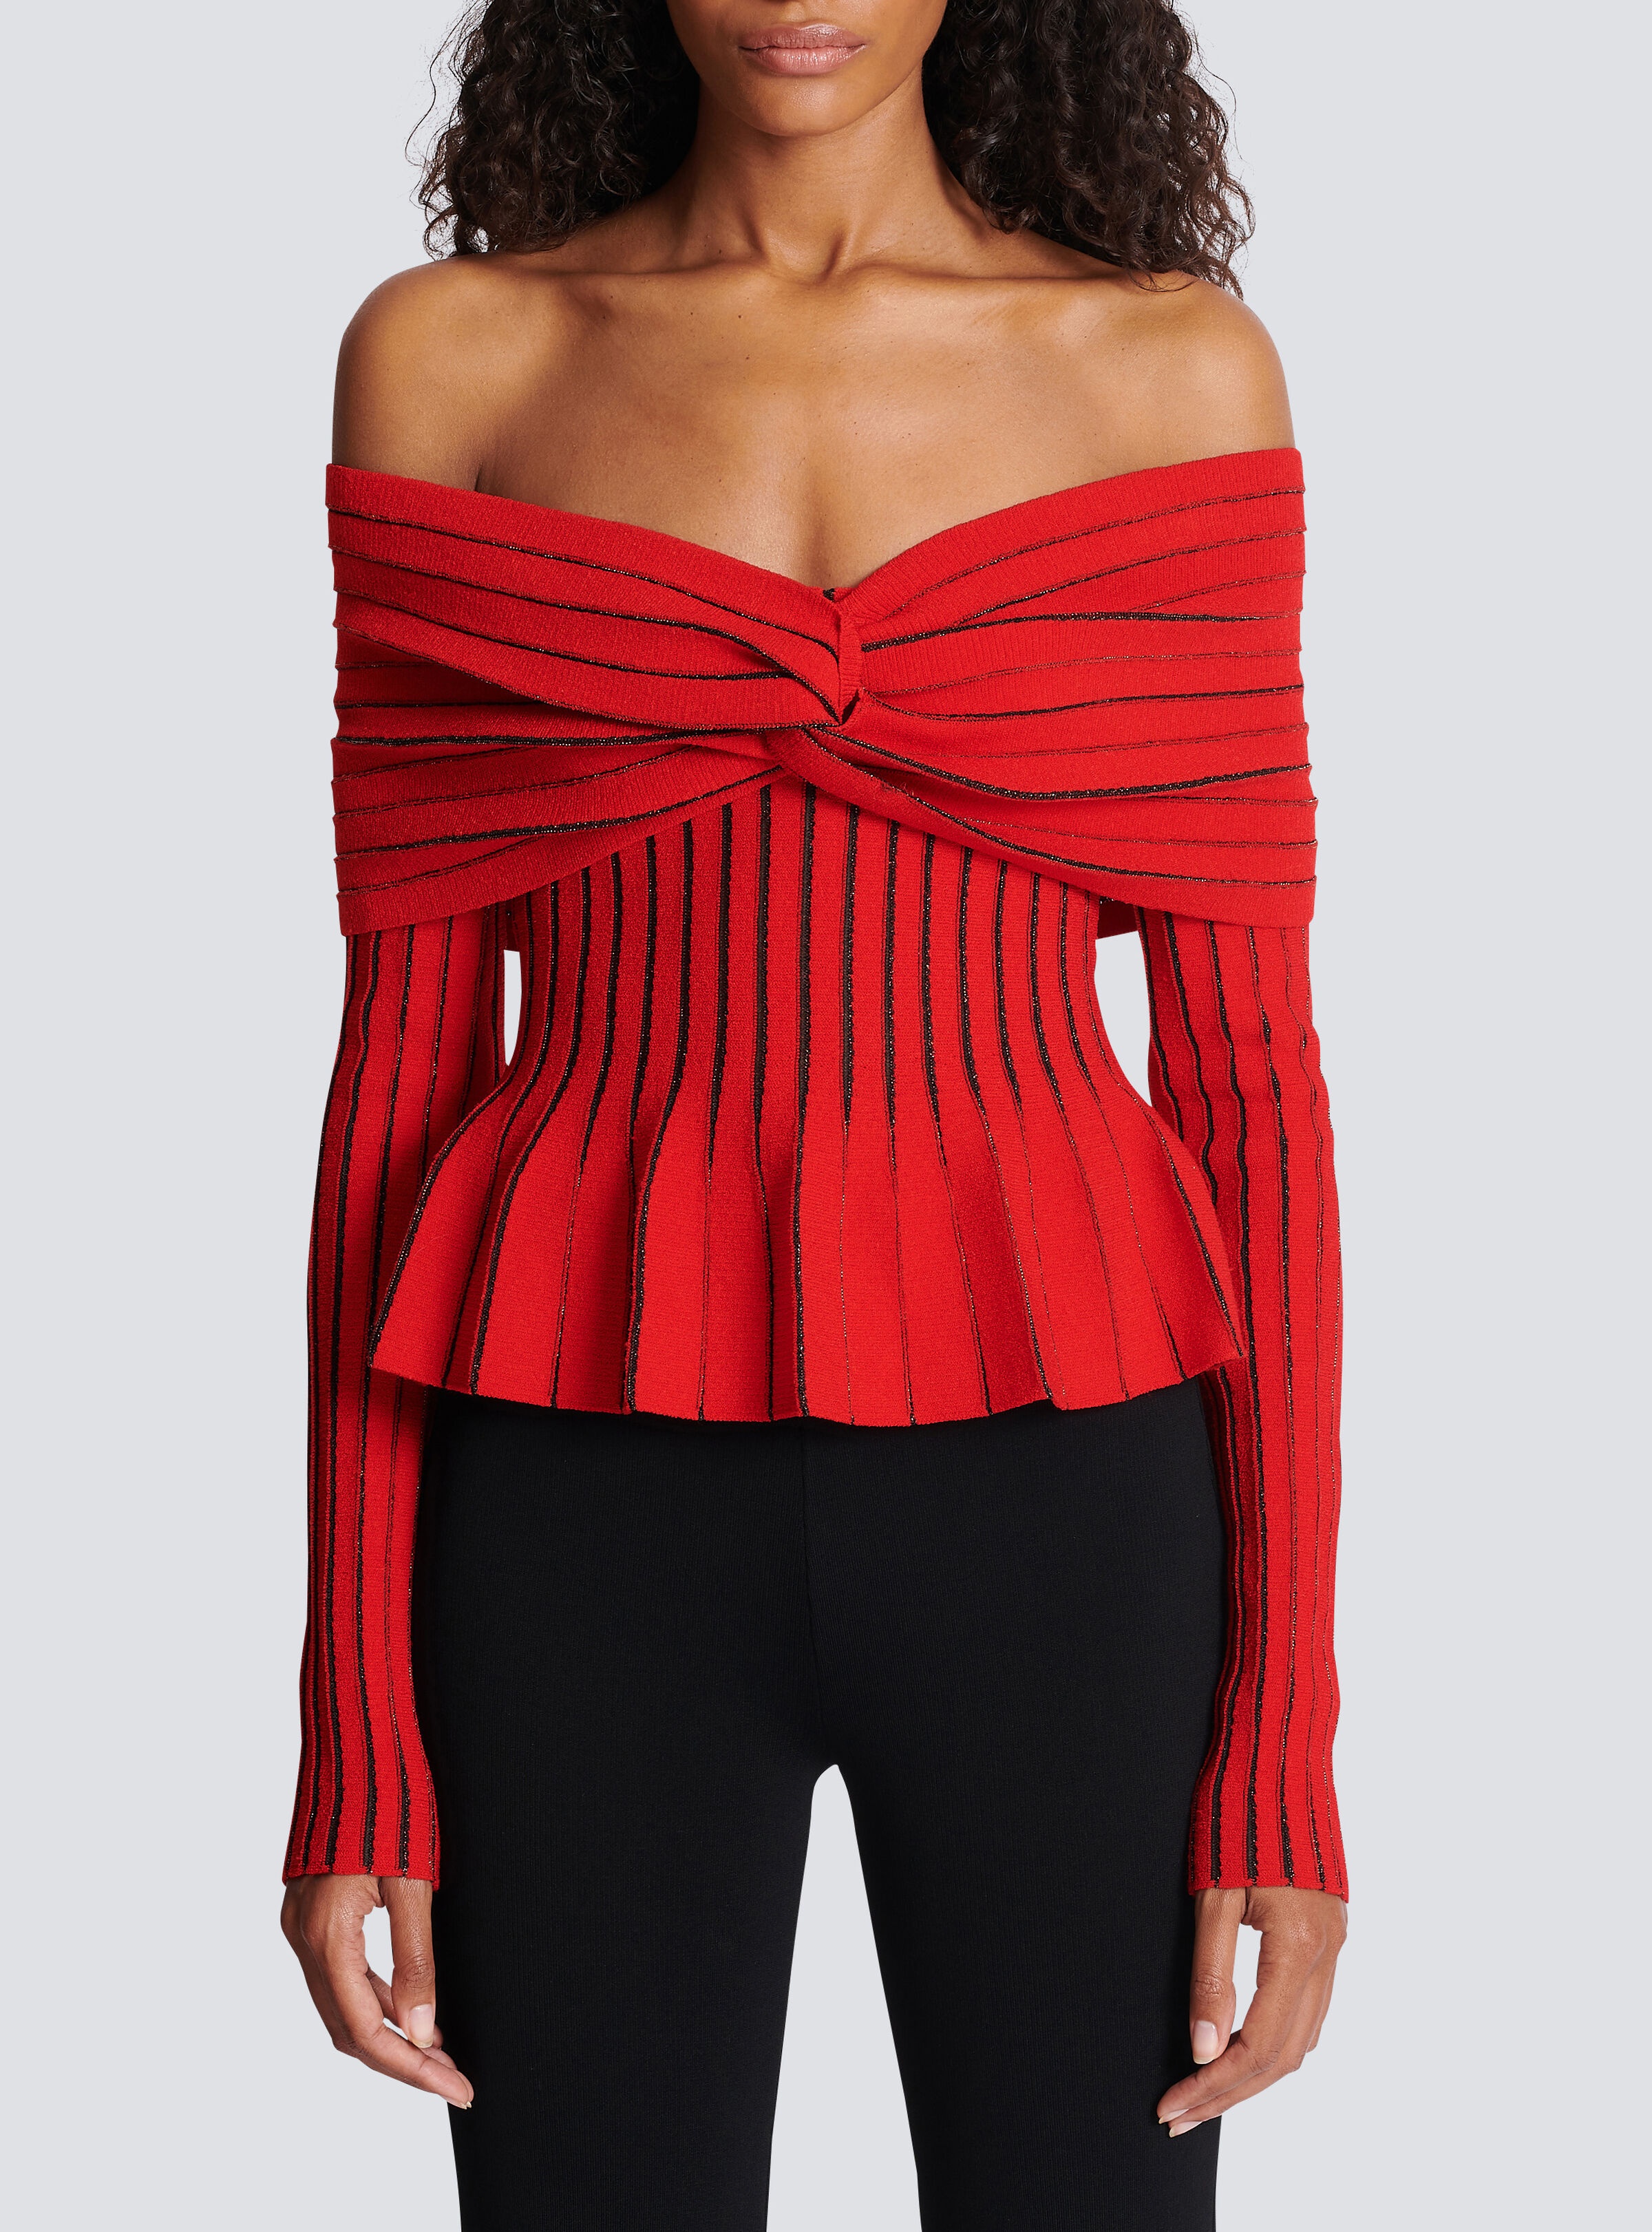 Knotted off-the-shoulder top - 5